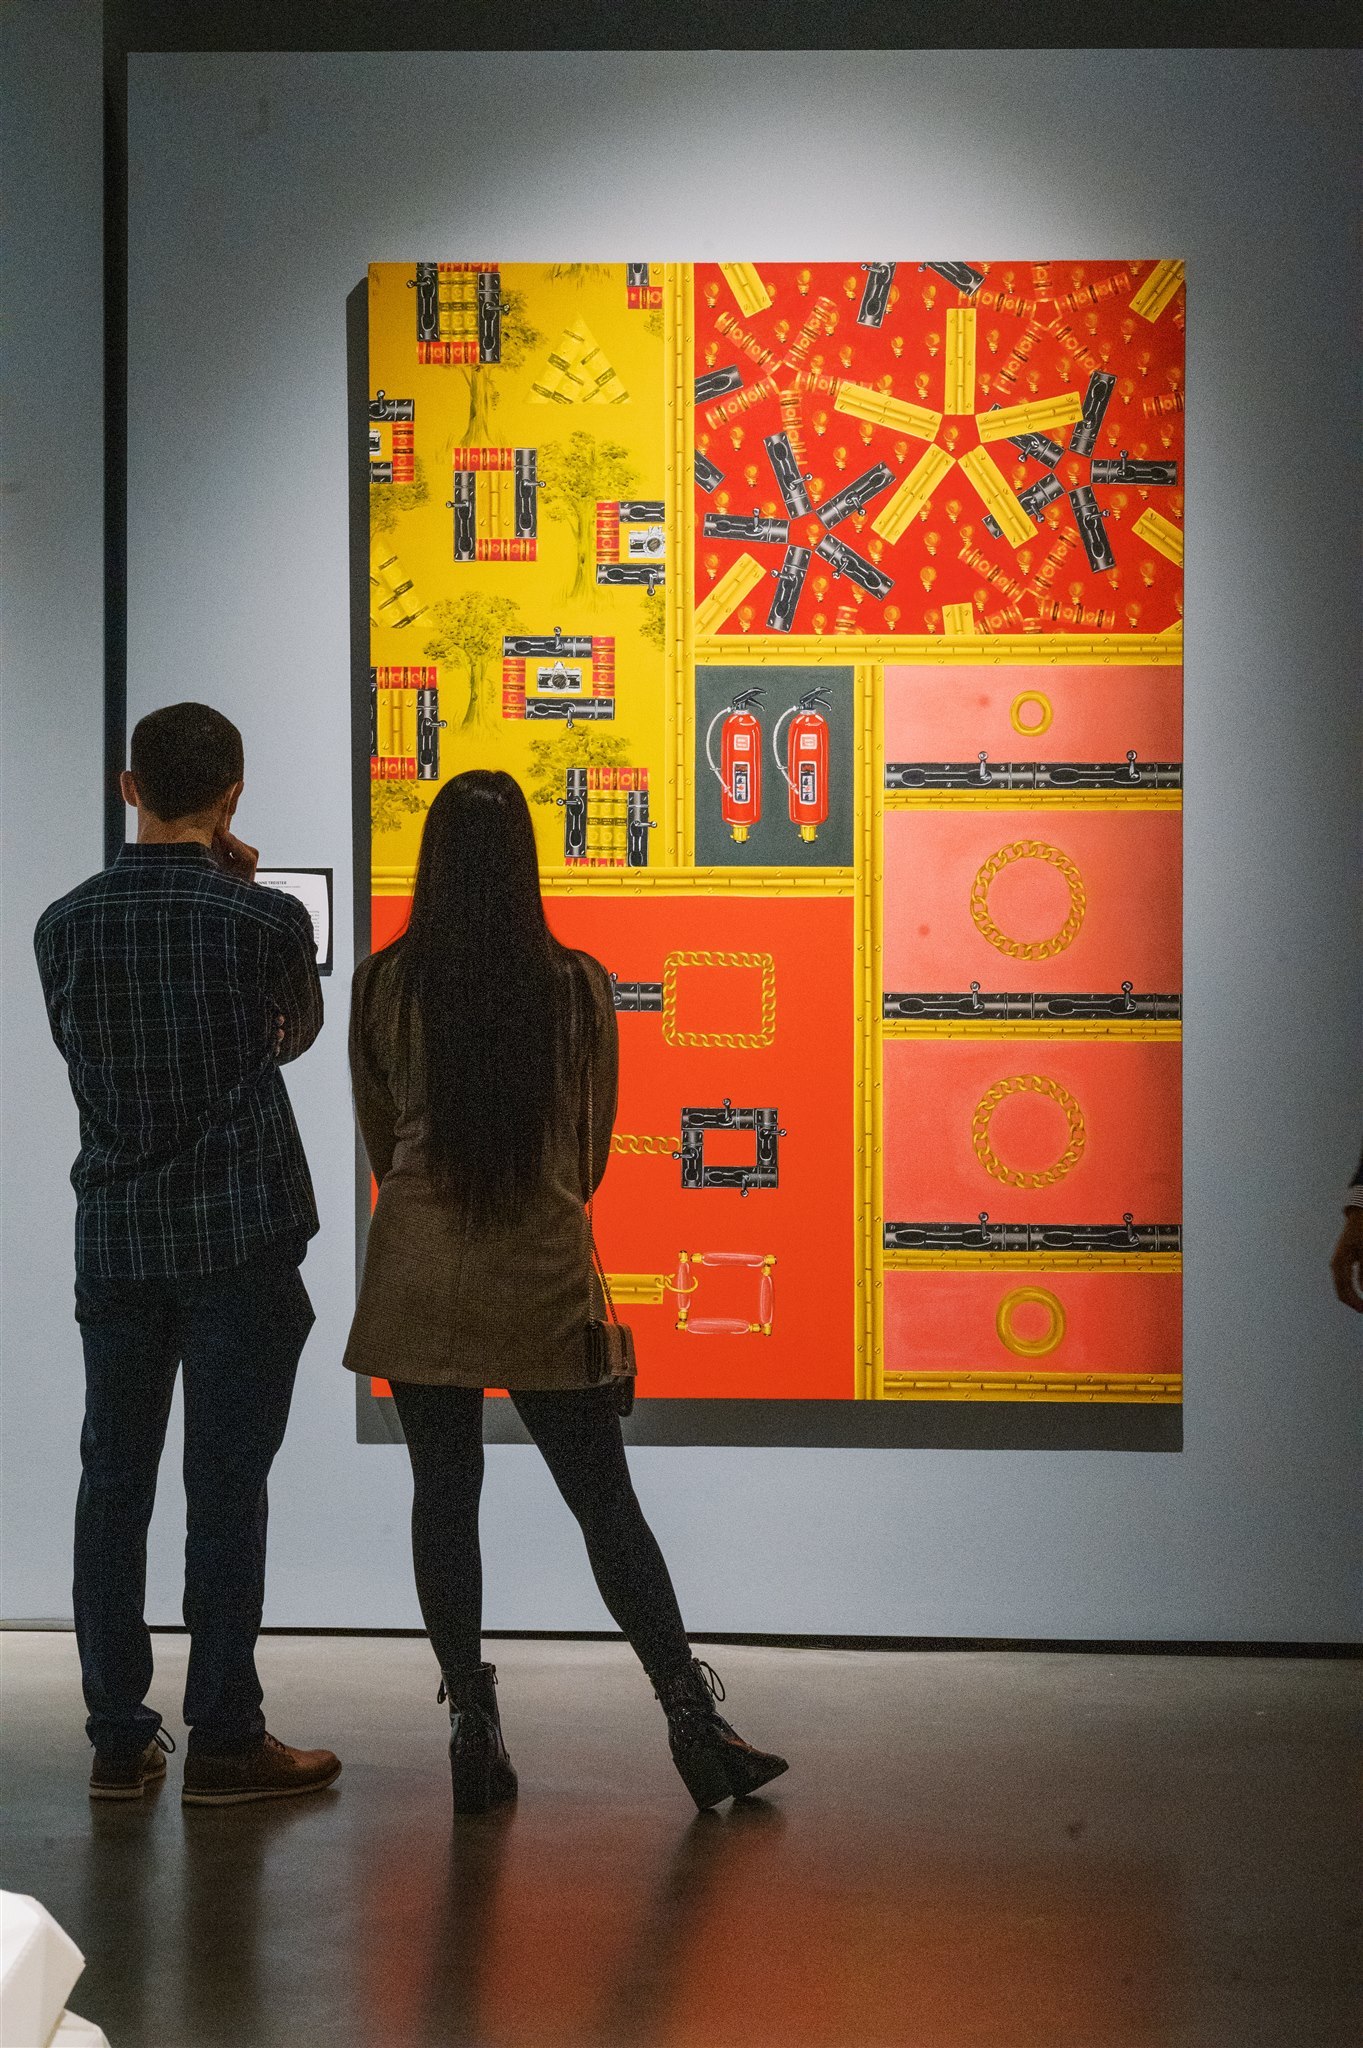 Two figures stand in a gray-walled gallery with concrete floors viewing a large painting featuring hinges, locks, trees, chains and fire extinguishers in warm yellows, reds and pinks and arranged in a grid